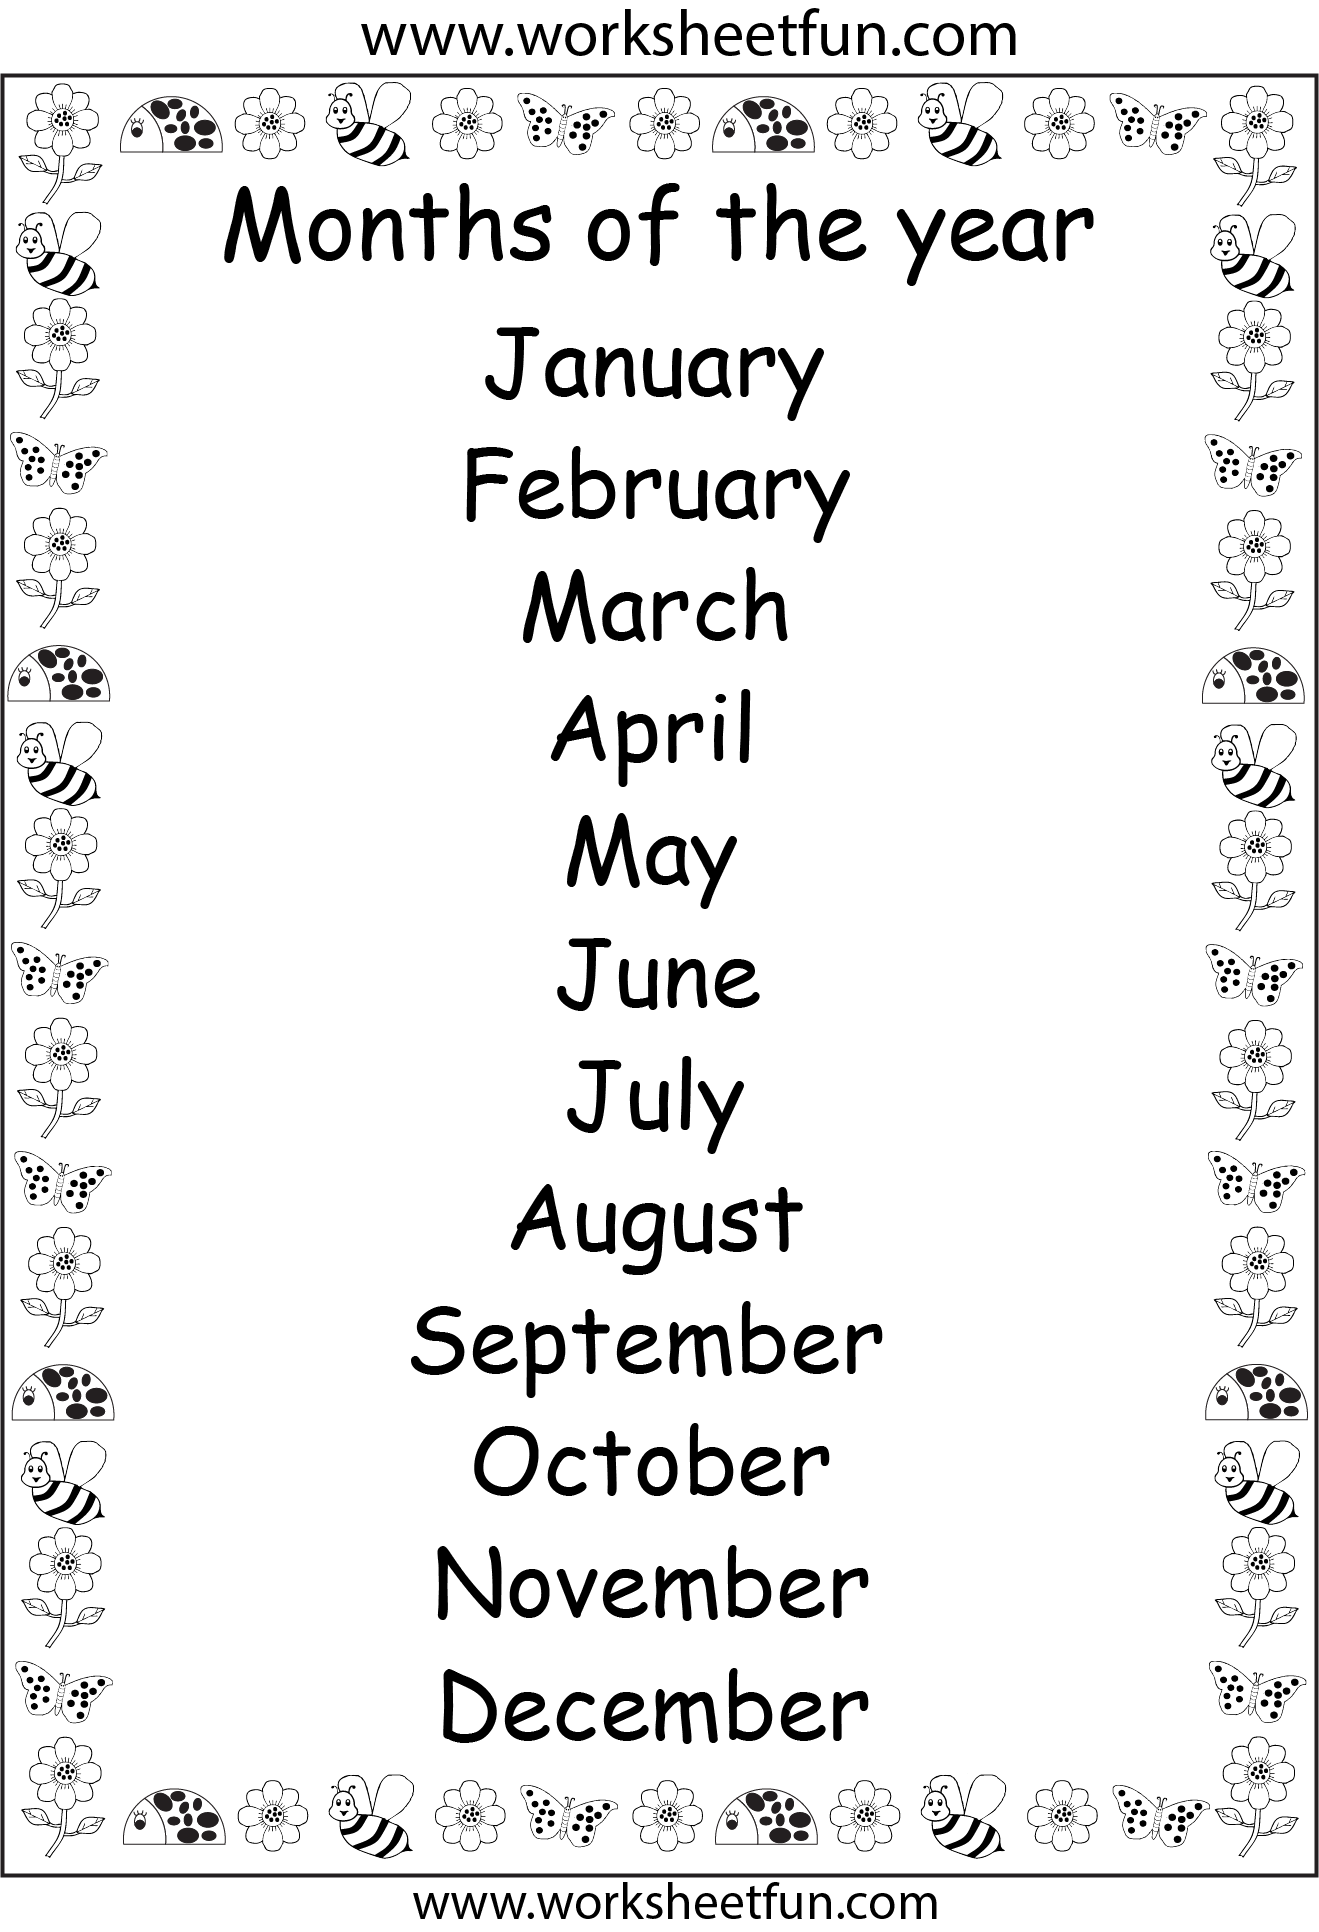 Months of the Year Printable Chart / FREE Printable Worksheets